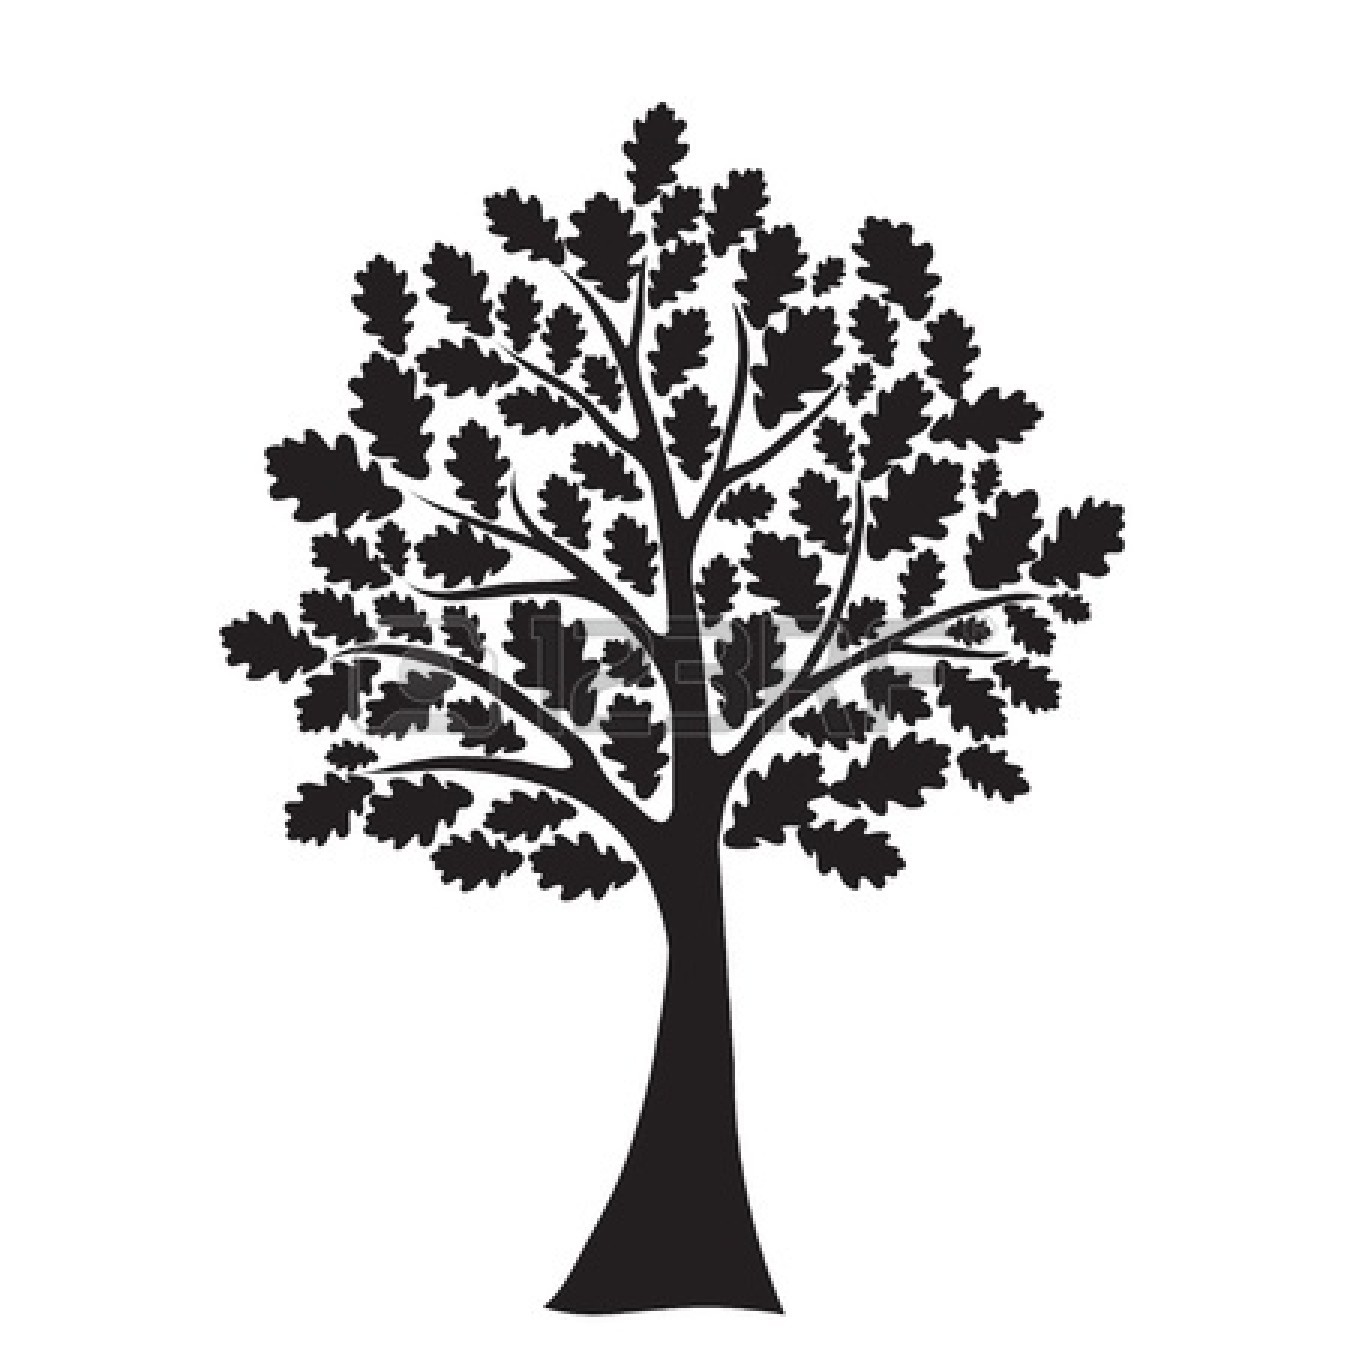 Tree Of Life Clipart Black And White - Cliparts.co